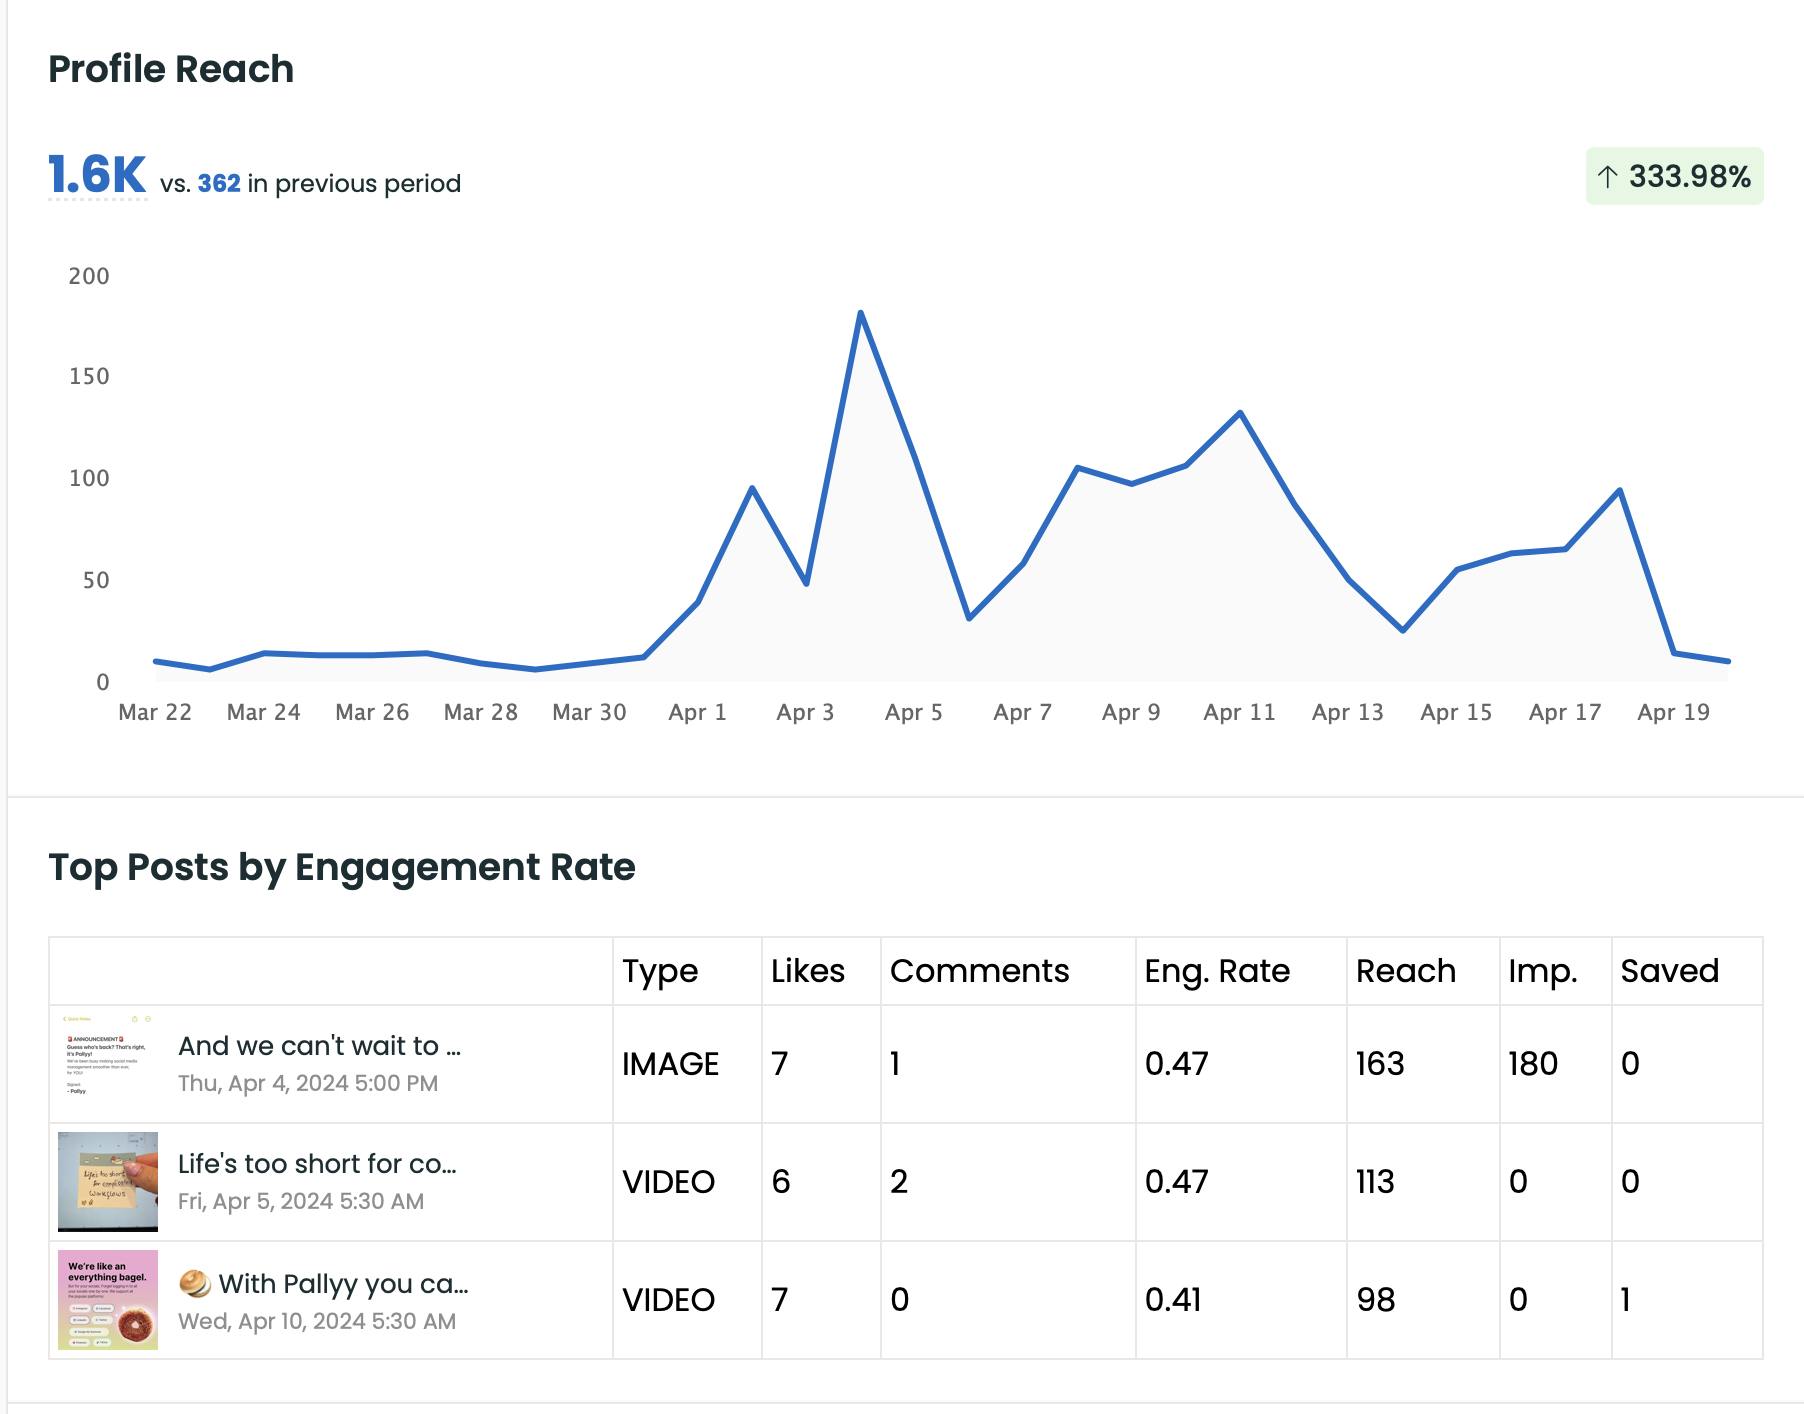 Pallyy analytics report - profile reach and top posts by engagement rate 